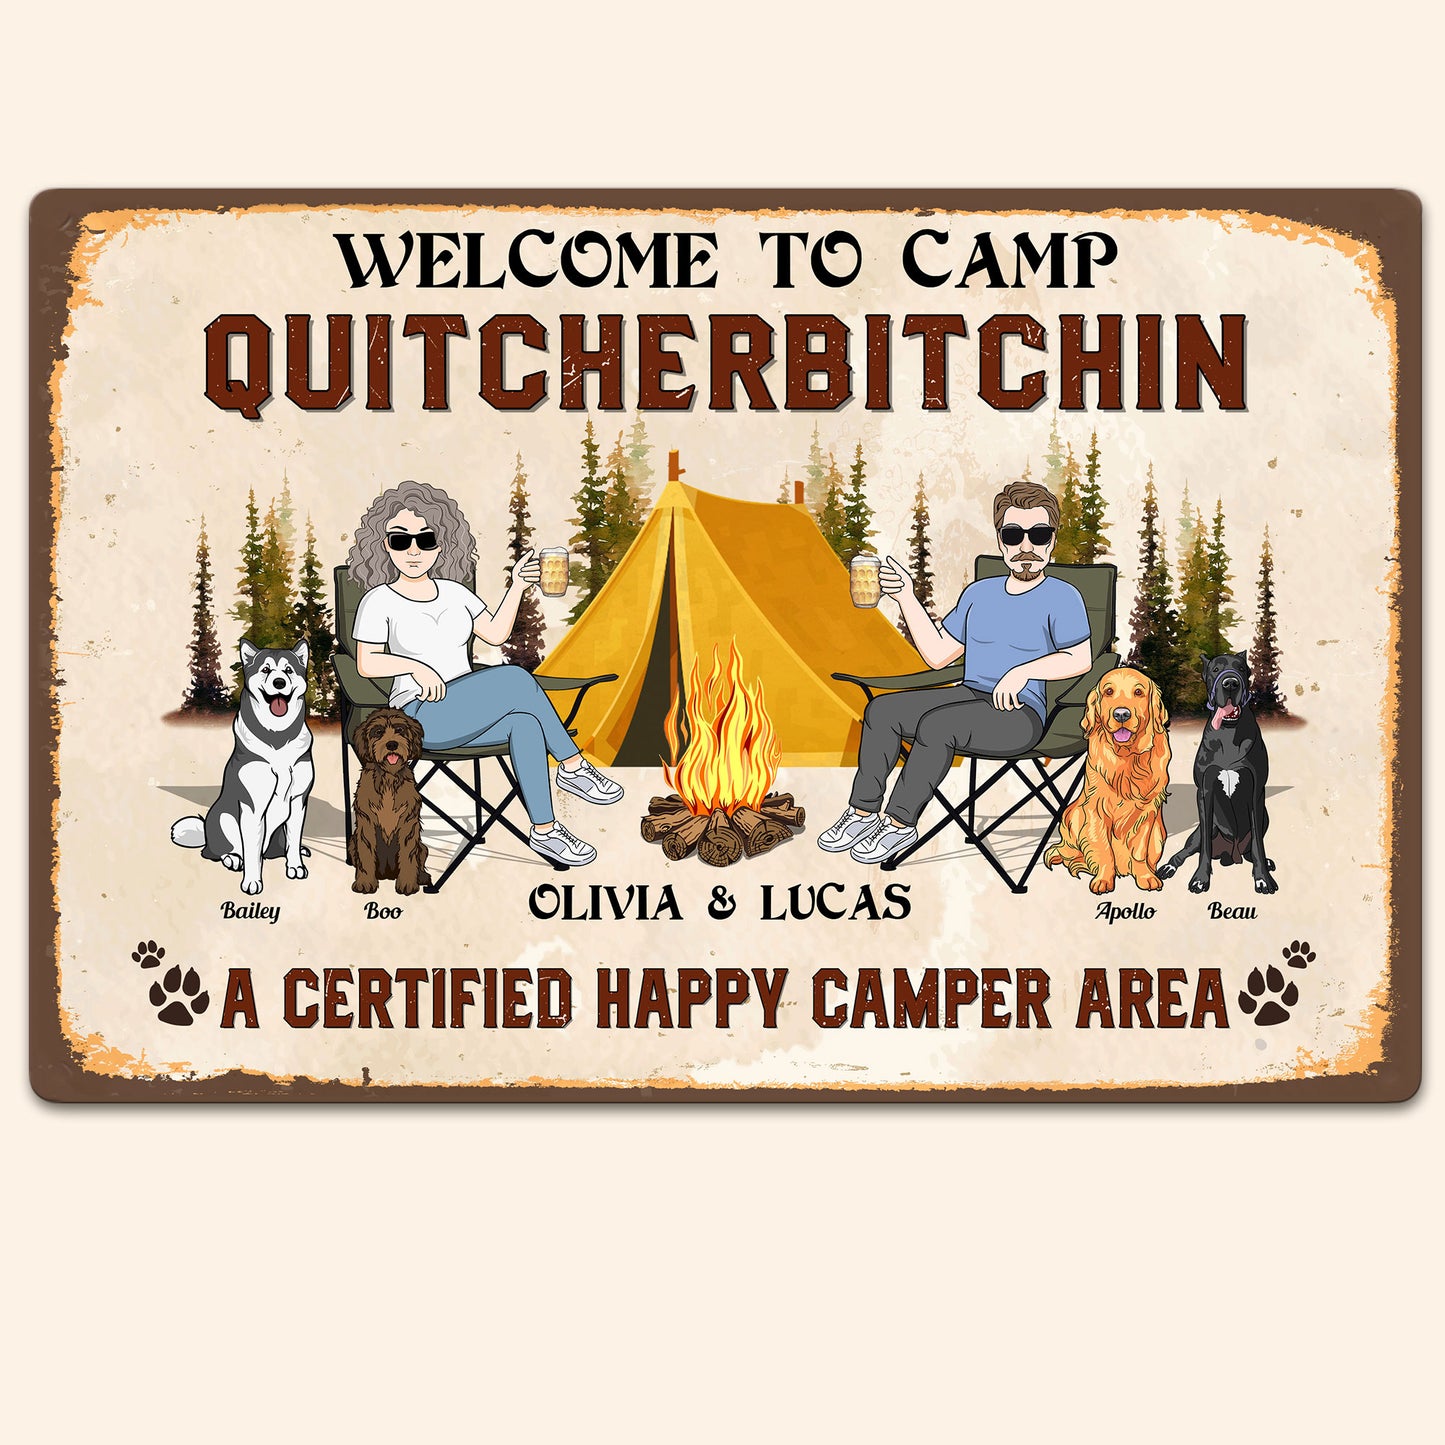 Welcome To Camp Quitcherbitchin - Personalized Metal Sign